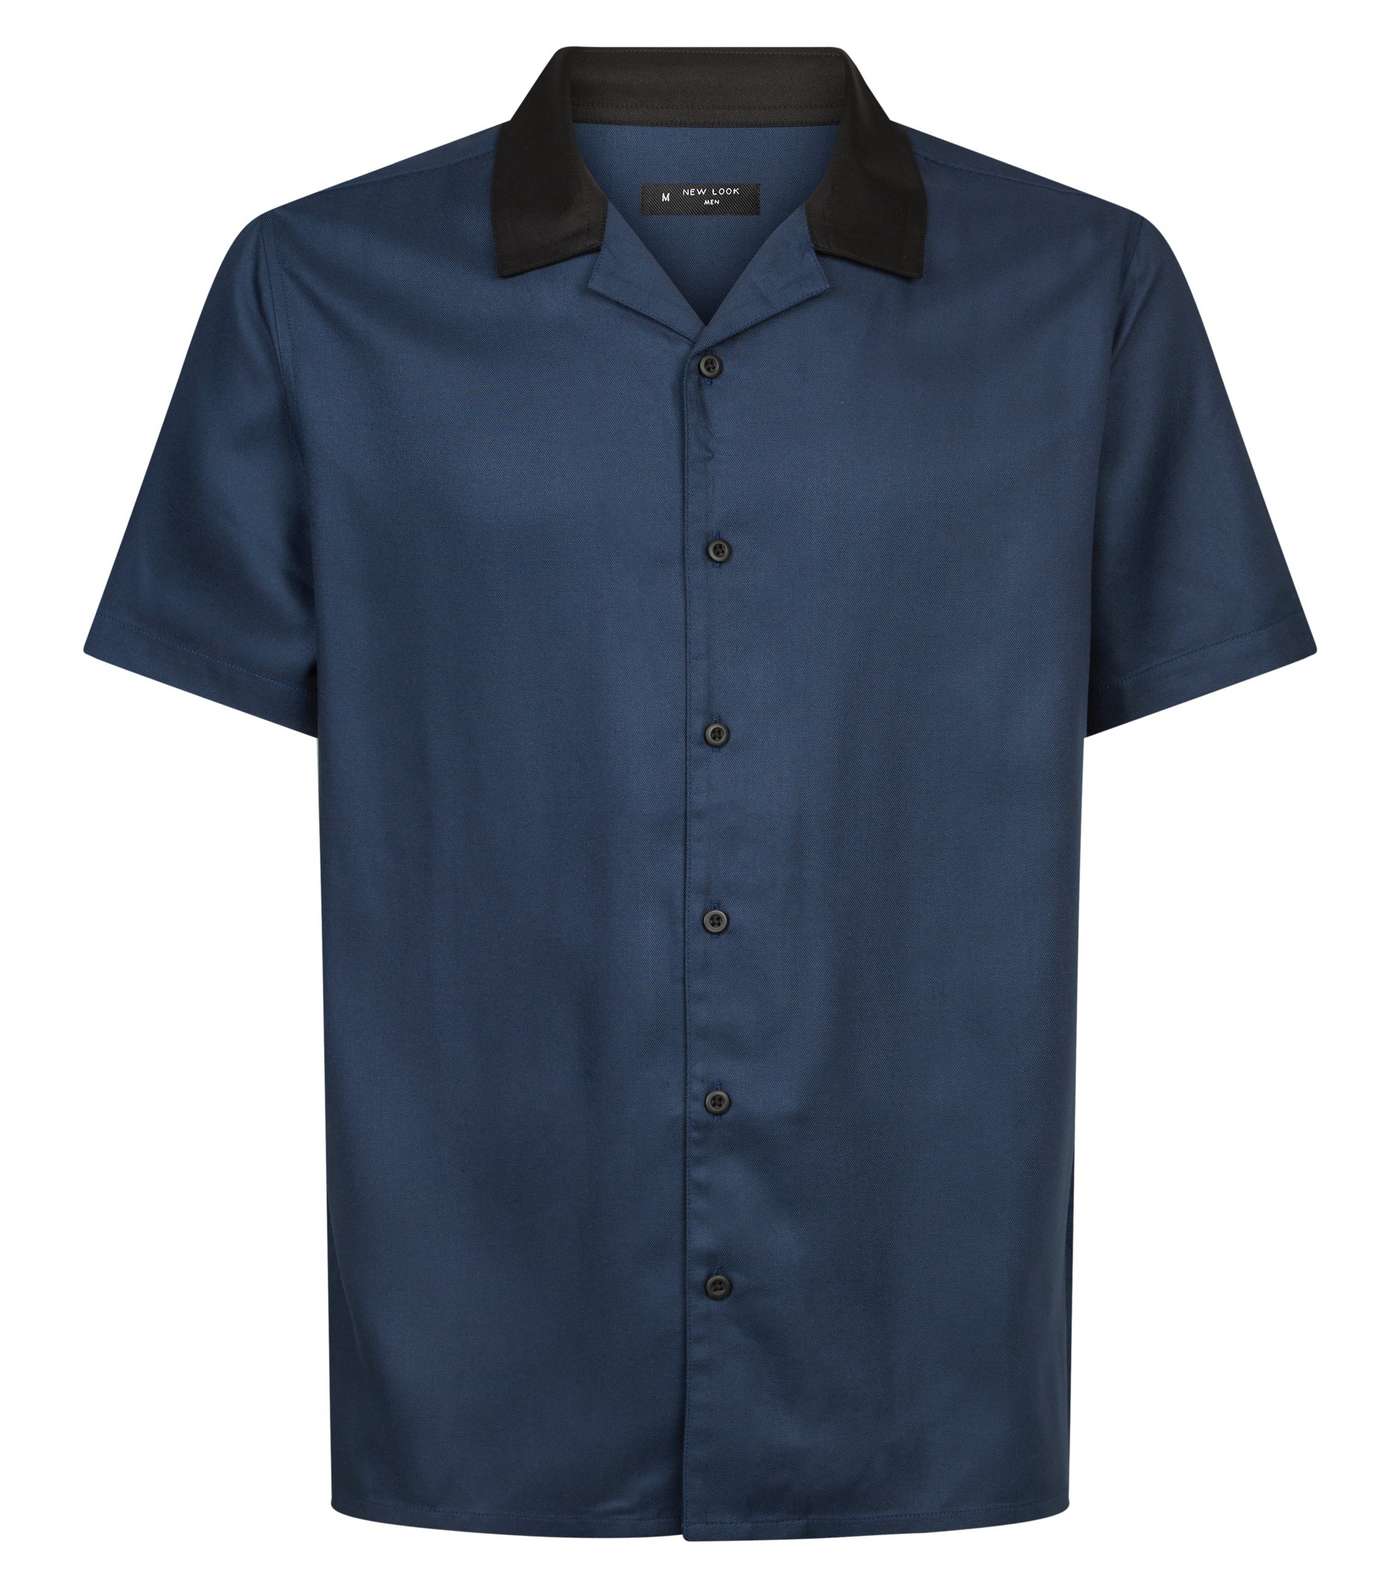 Bright Blue Contrast Collared Shirt Image 4